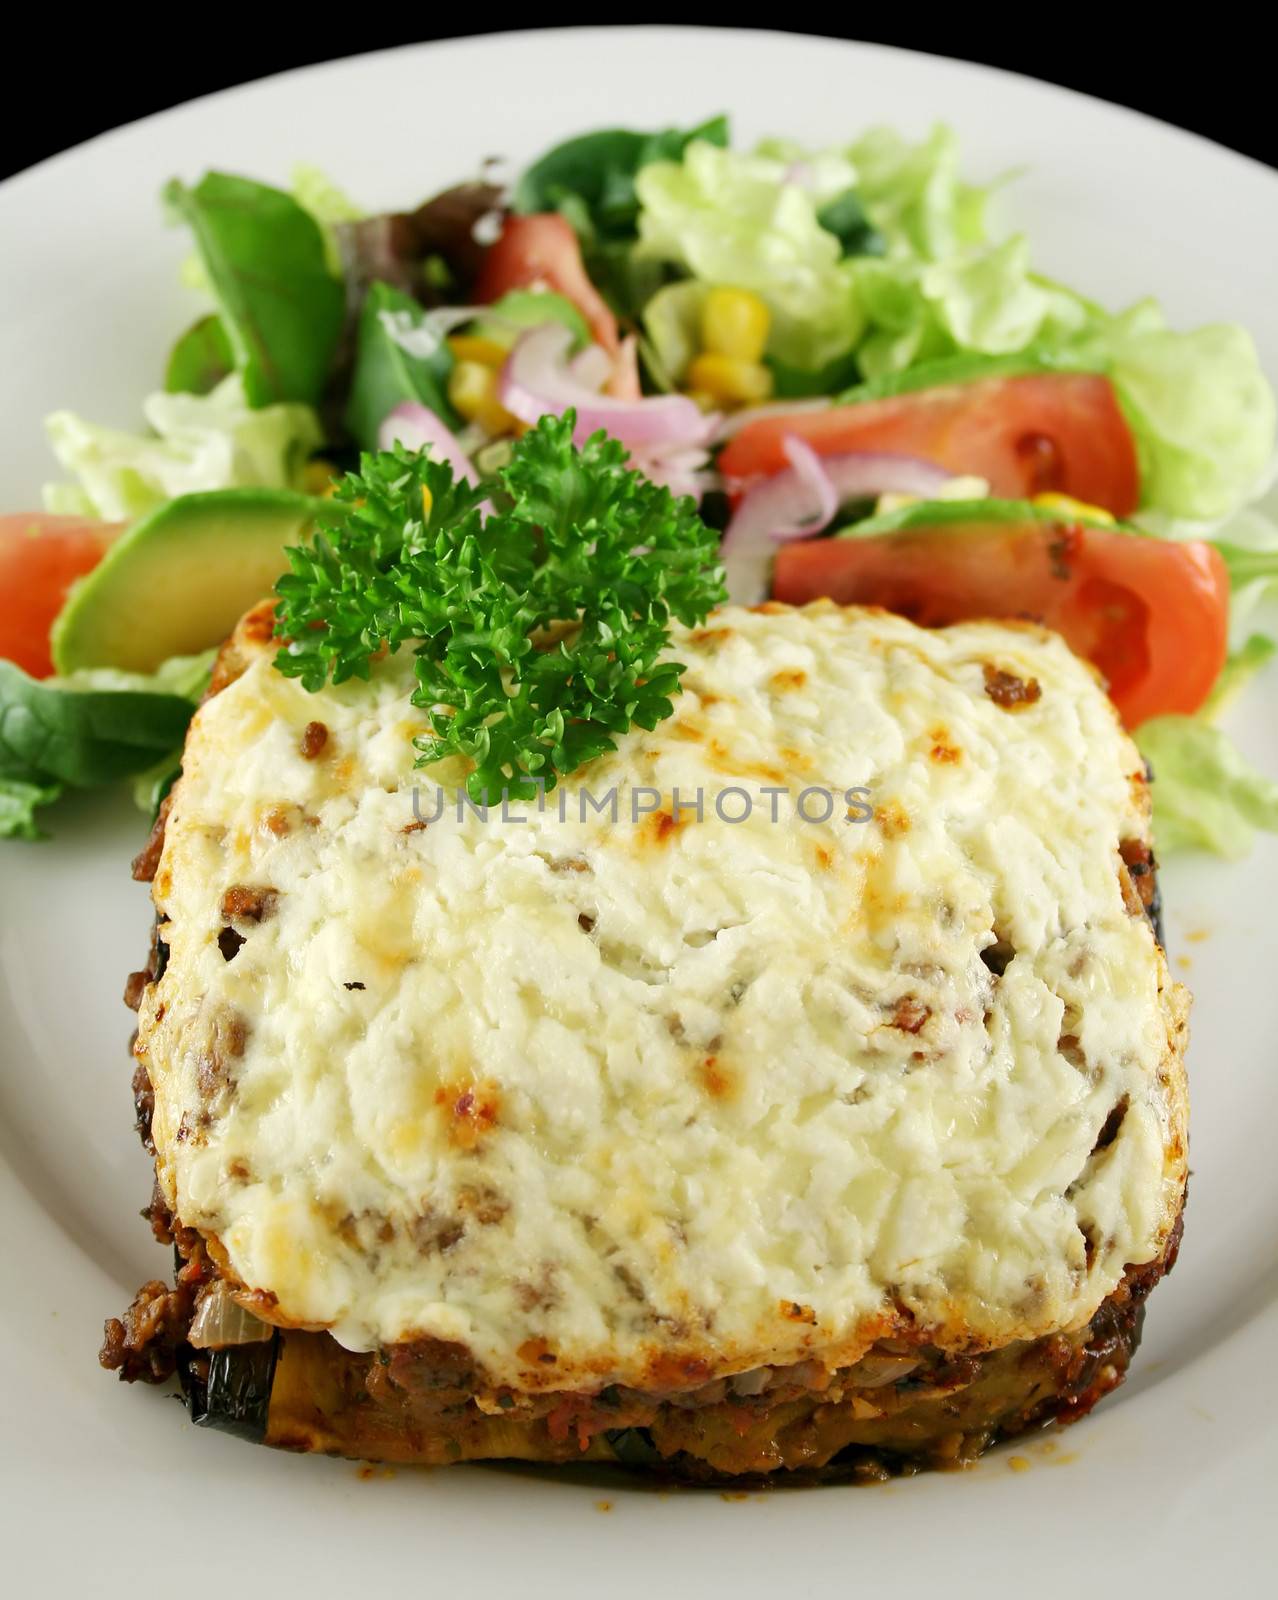 Greek lamb moussaka with egg plant cheese and salad.